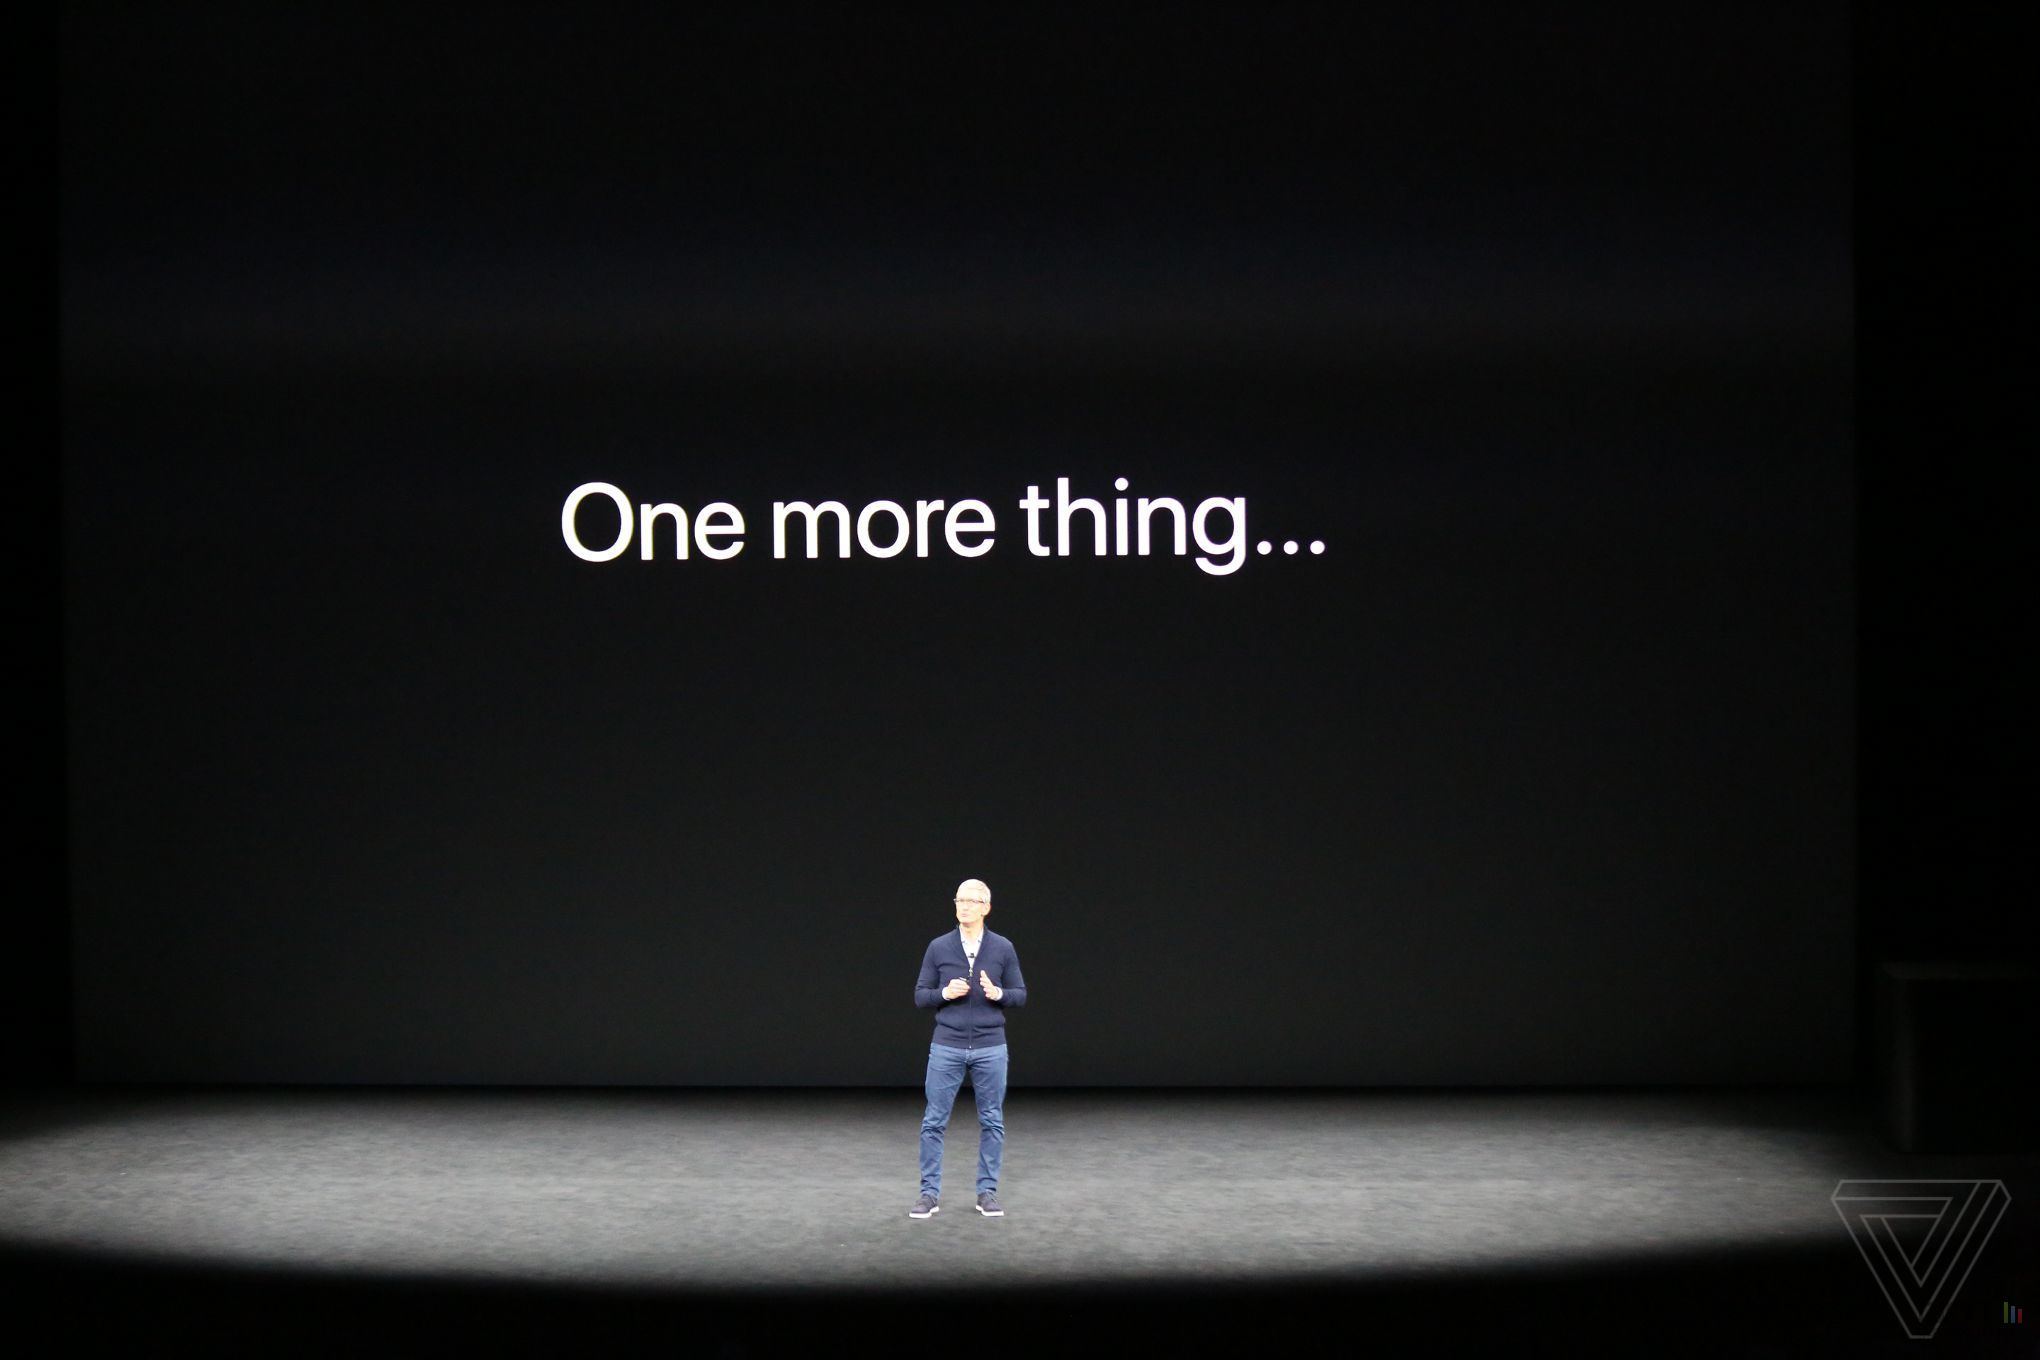 Keynote Apple One more thing...l'iPhone X avec écran OLED